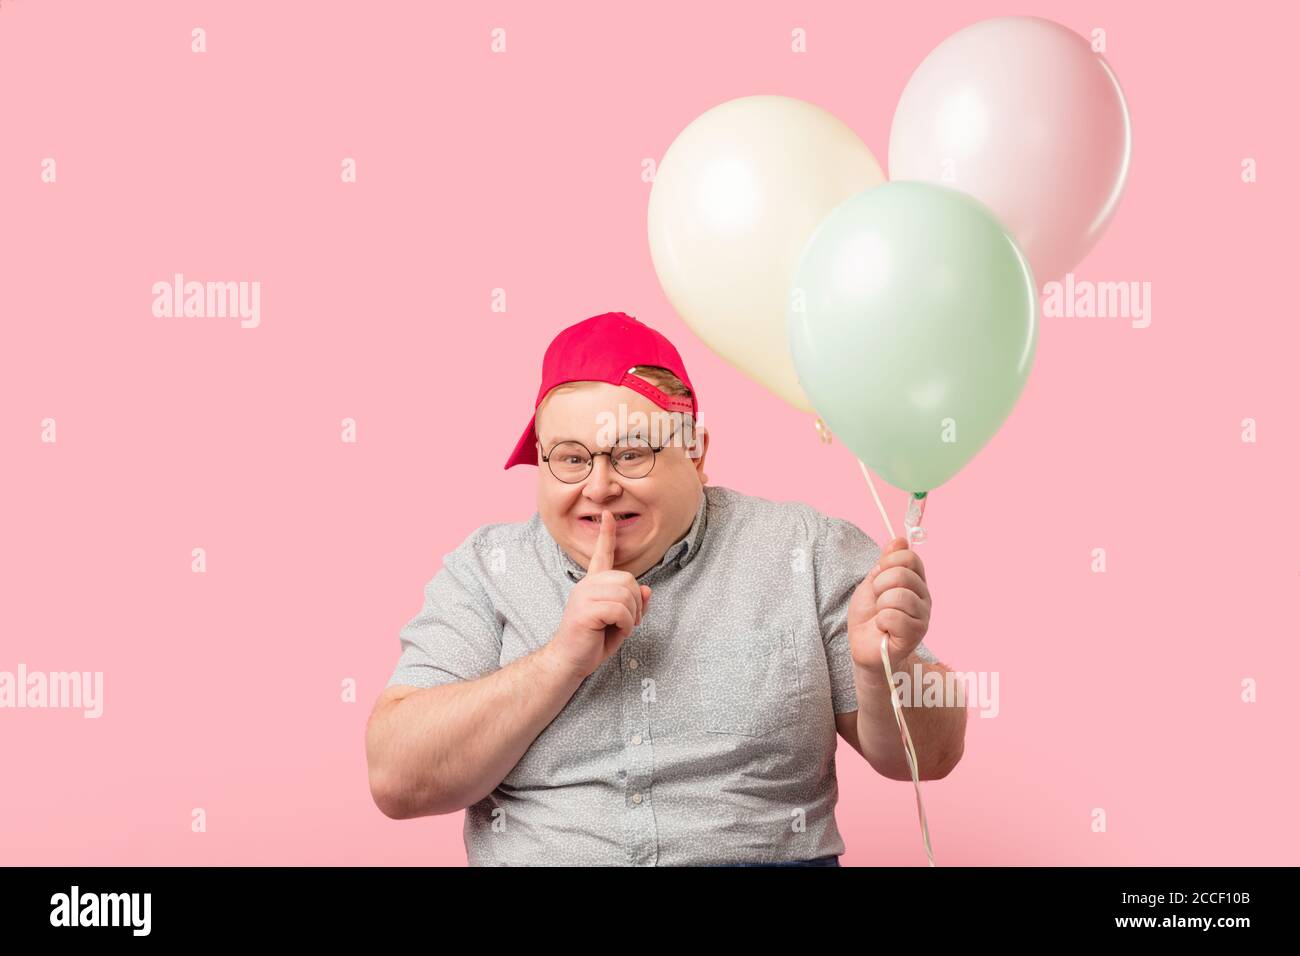 Plump softie man much similar to Winnie the Pooh asks to keep secret that he has air baloons on the birthday of his daughter, keeps finger near his li Stock Photo